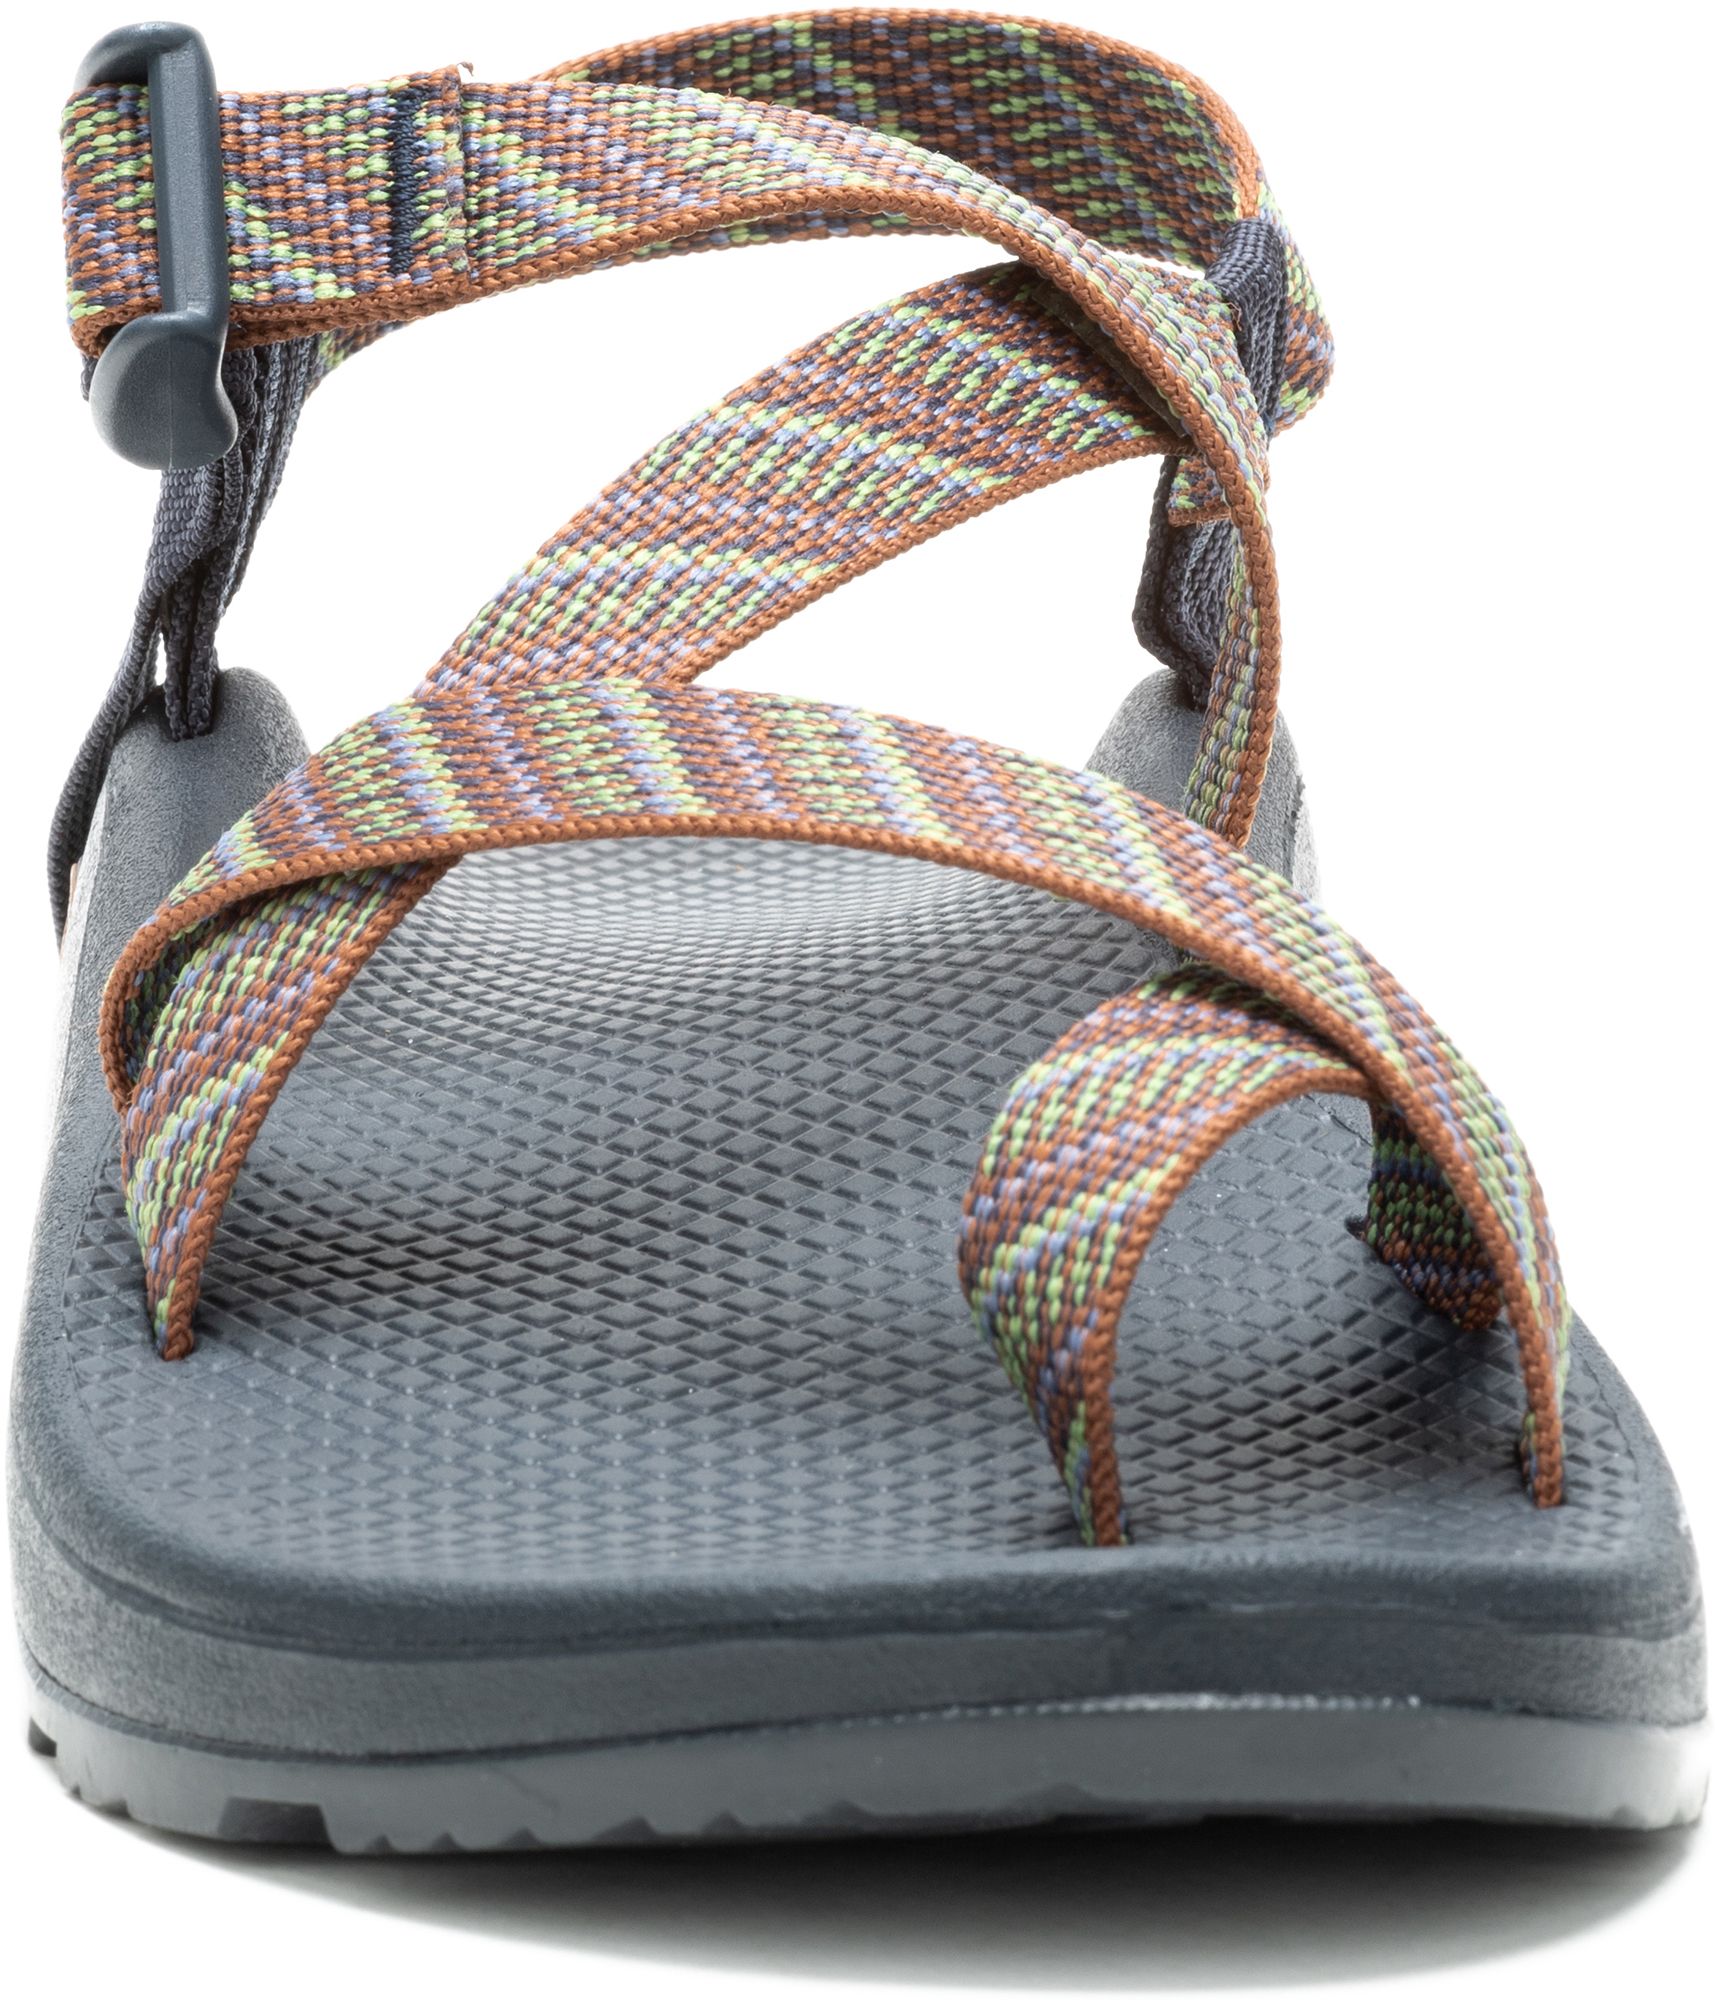 Dick's Sporting Goods Chaco Men's Z/Cloud 2 Sandals | The Market Place